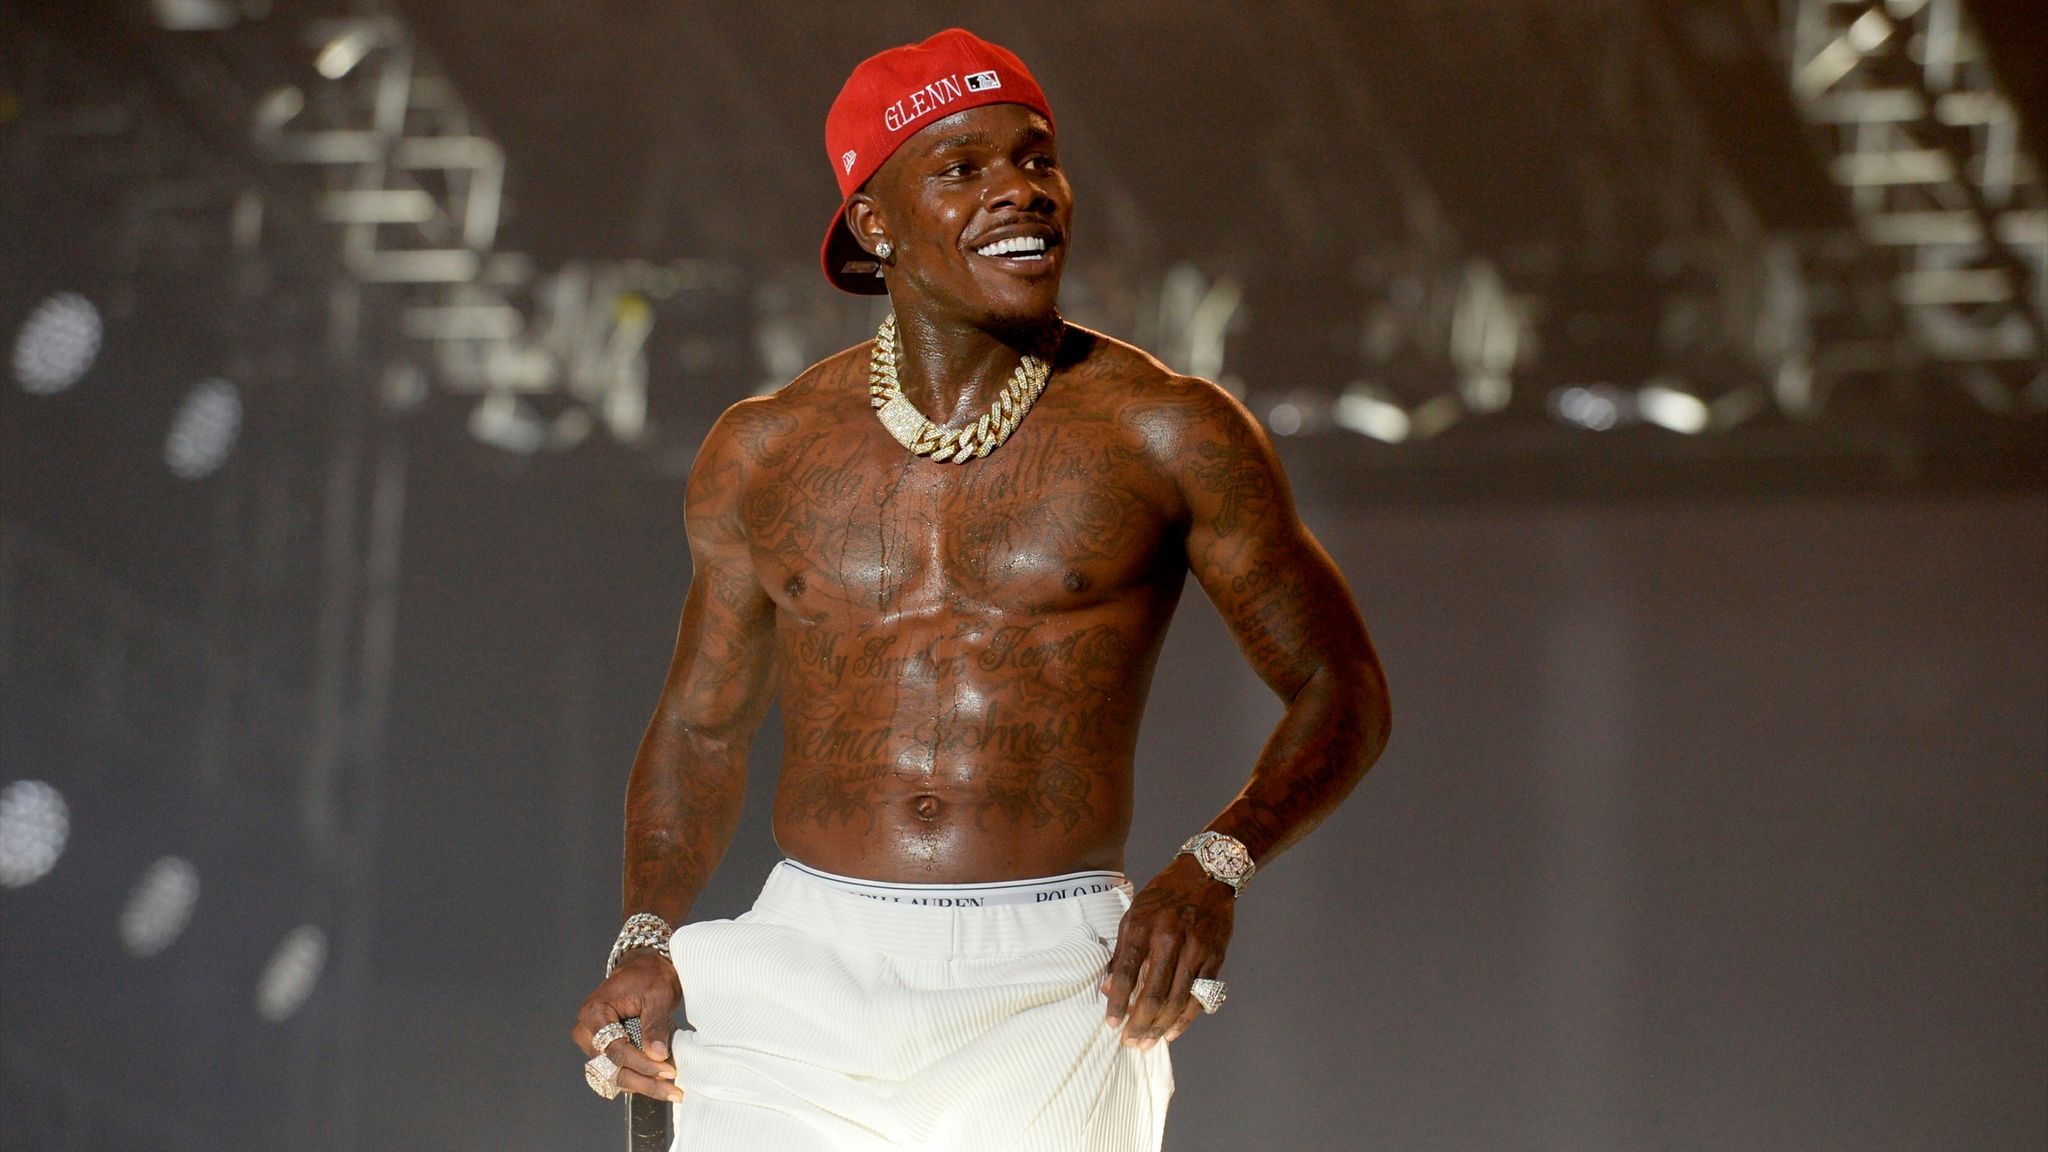 ADDITIONAL INFORMATION ABOUT THE SHOOTING VICTIM AT DABABY’S NORTH CAROLINA RESIDENCE